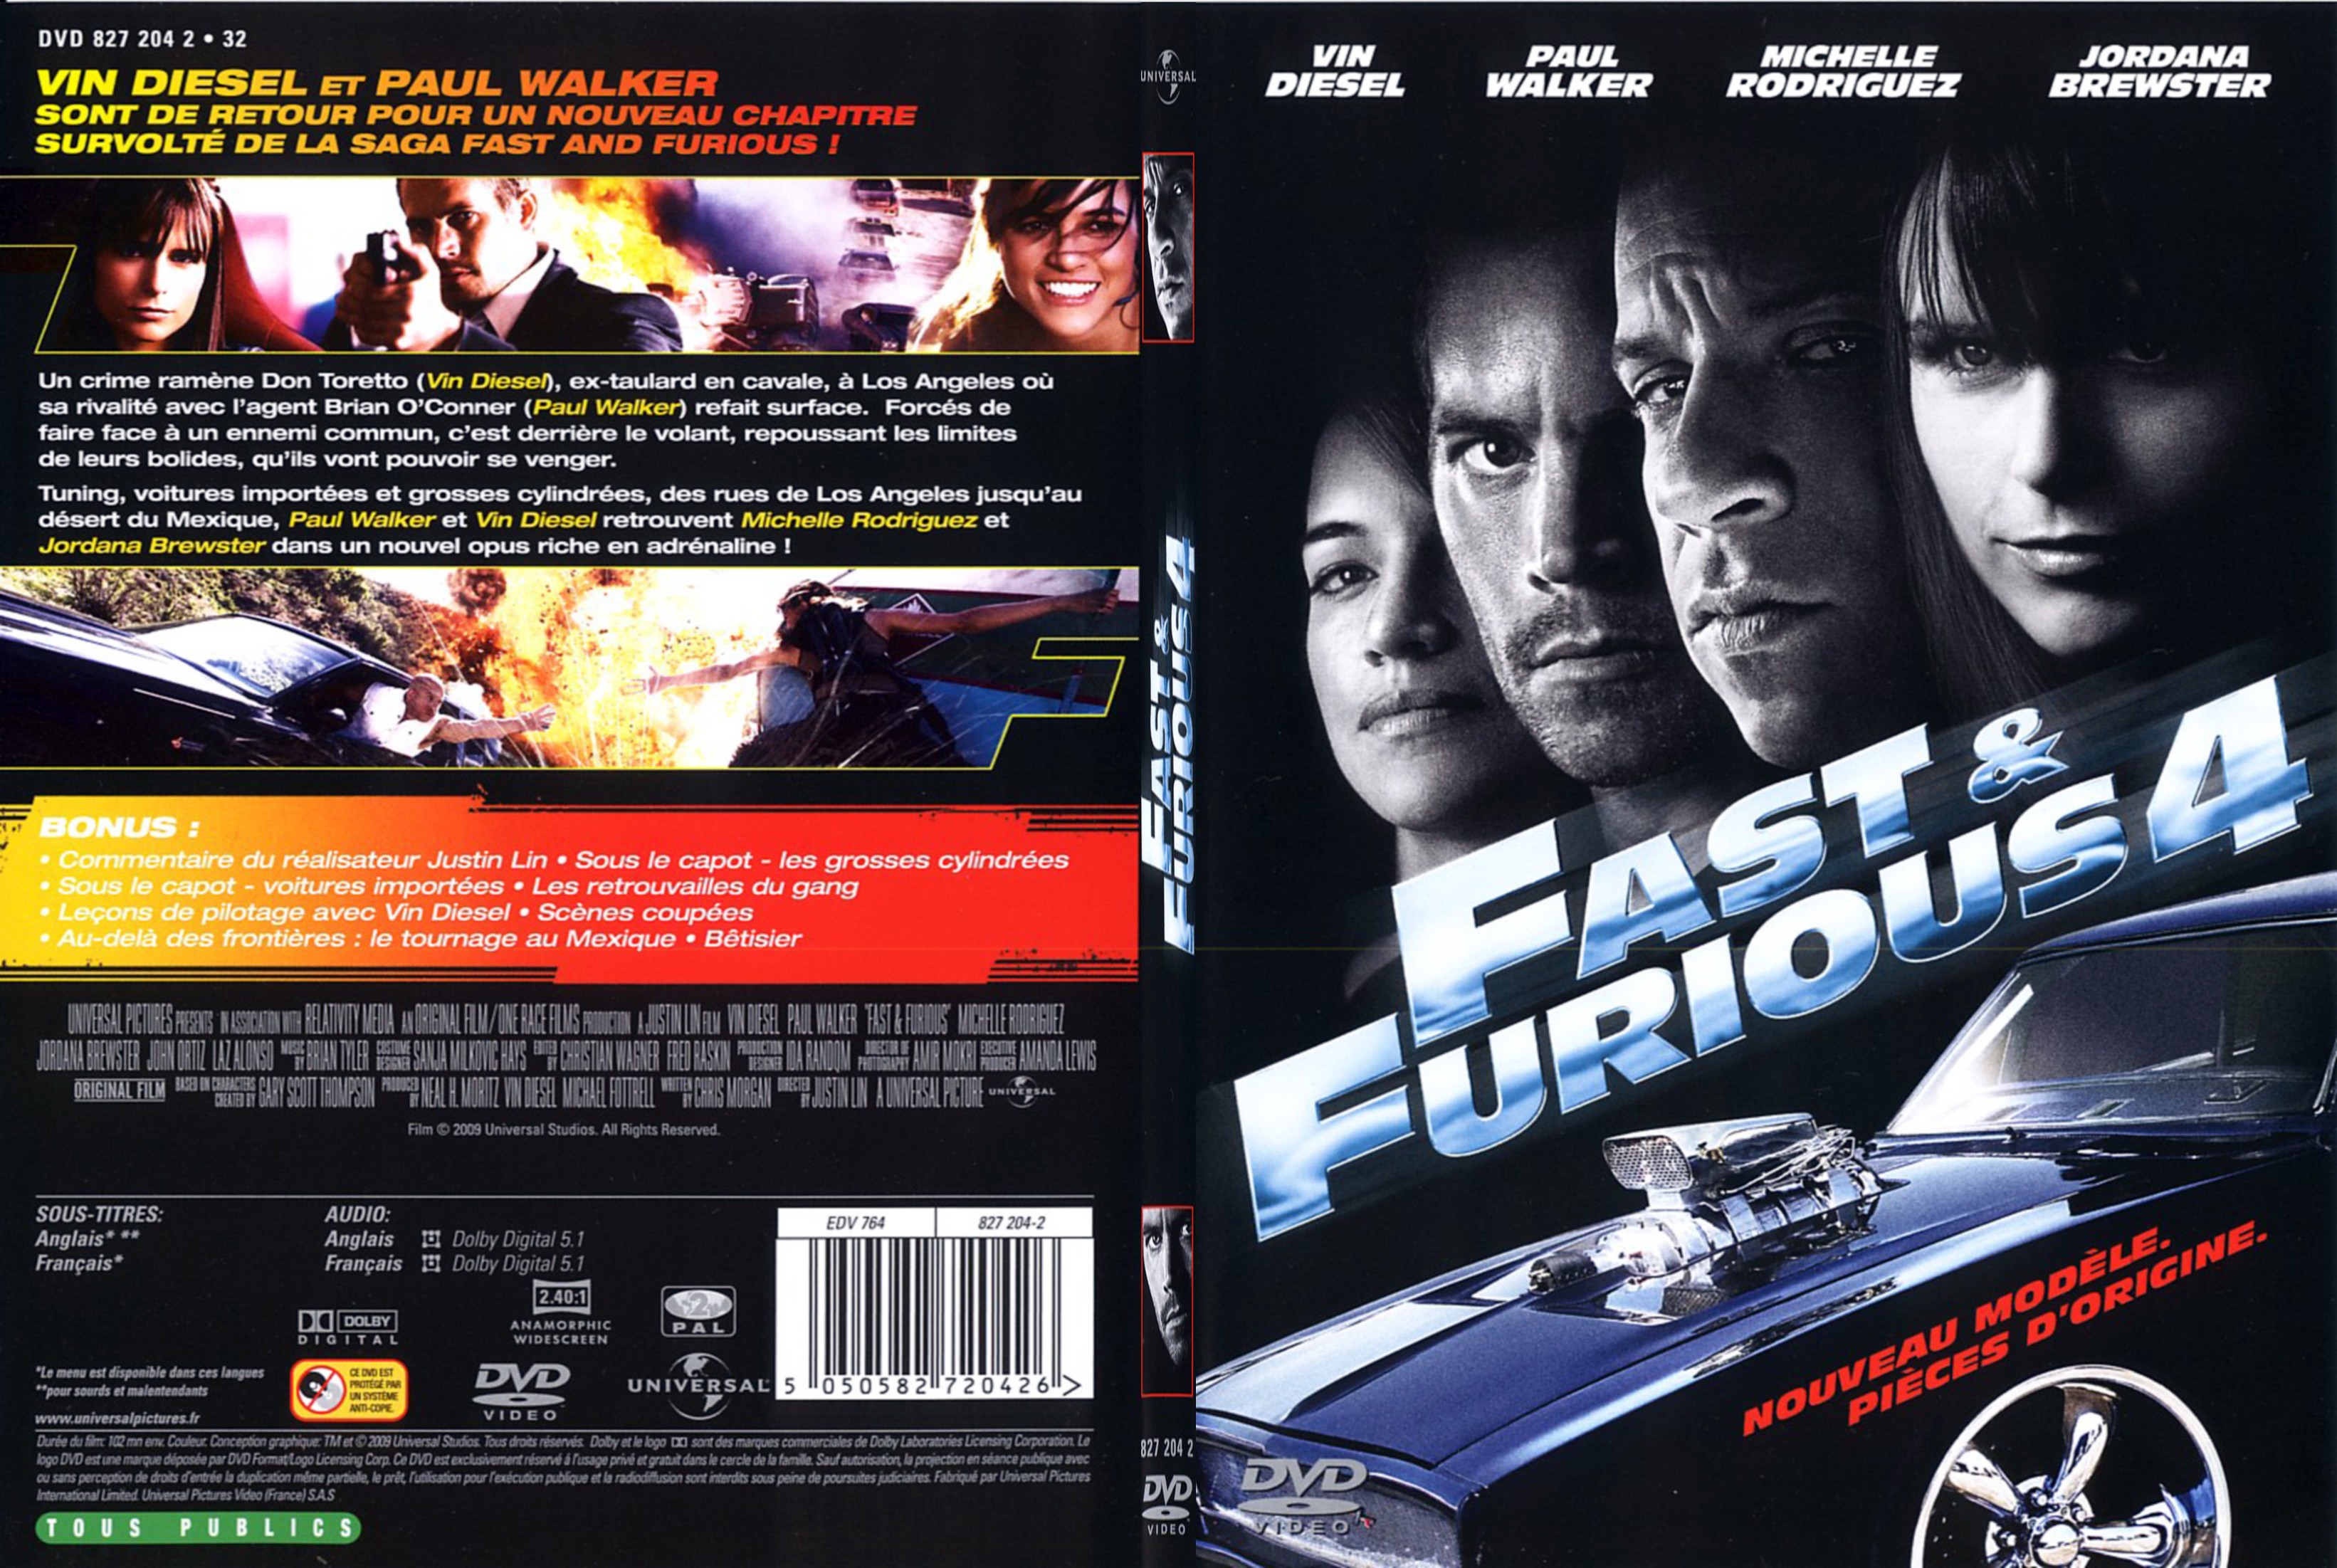 Jaquette DVD Fast and furious 4 - SLIM